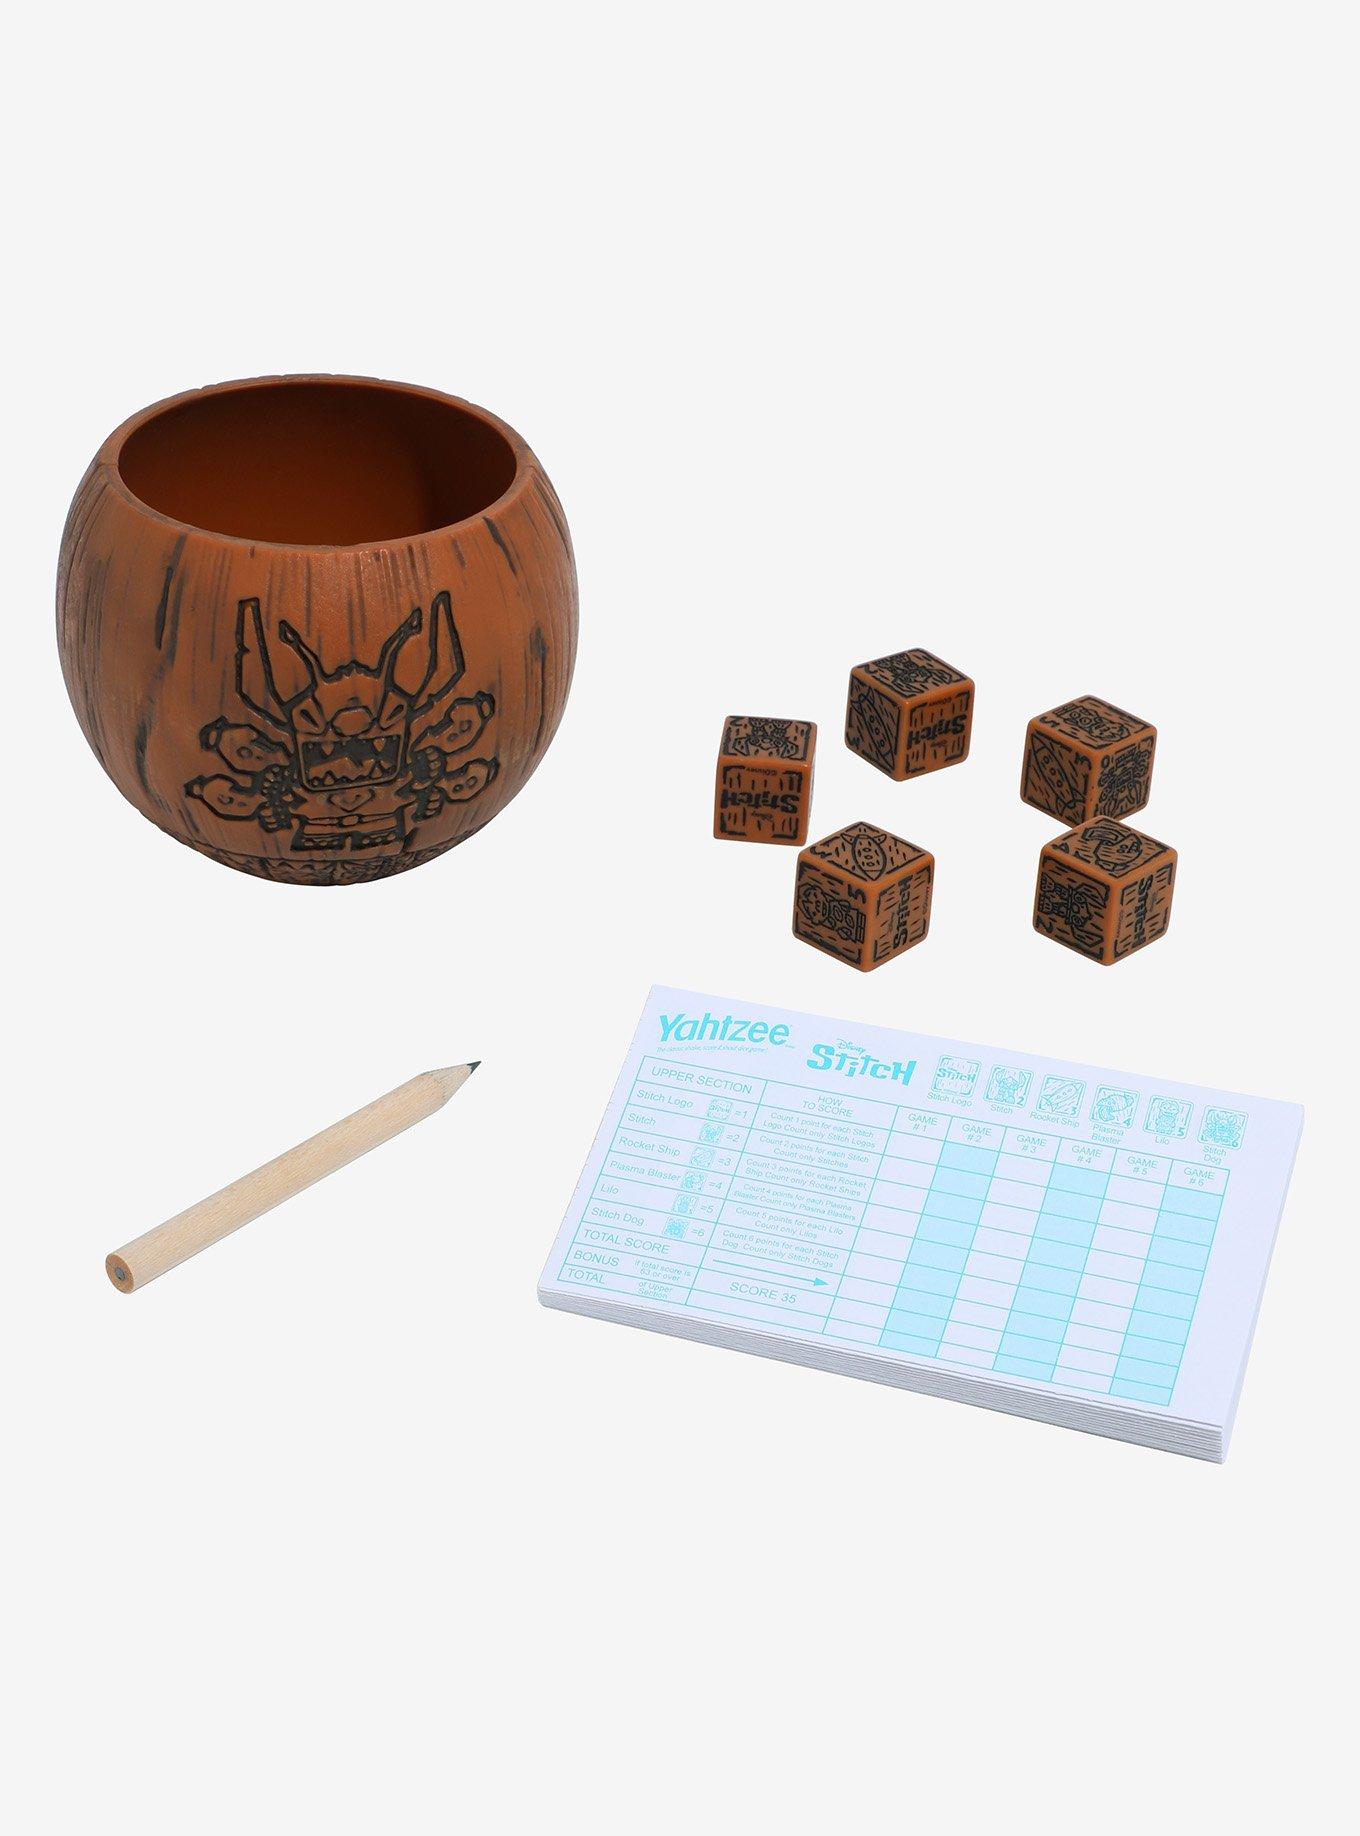 USAOPOLY YAHTZEE: Disney Stitch Collectible Stitch Tiki Style Dice Cup  Classic Dice Game Based on Disney's Lilo & Stitch Great for Family Night  Officially Licensed Disney Game & Merchandise, Board Games 